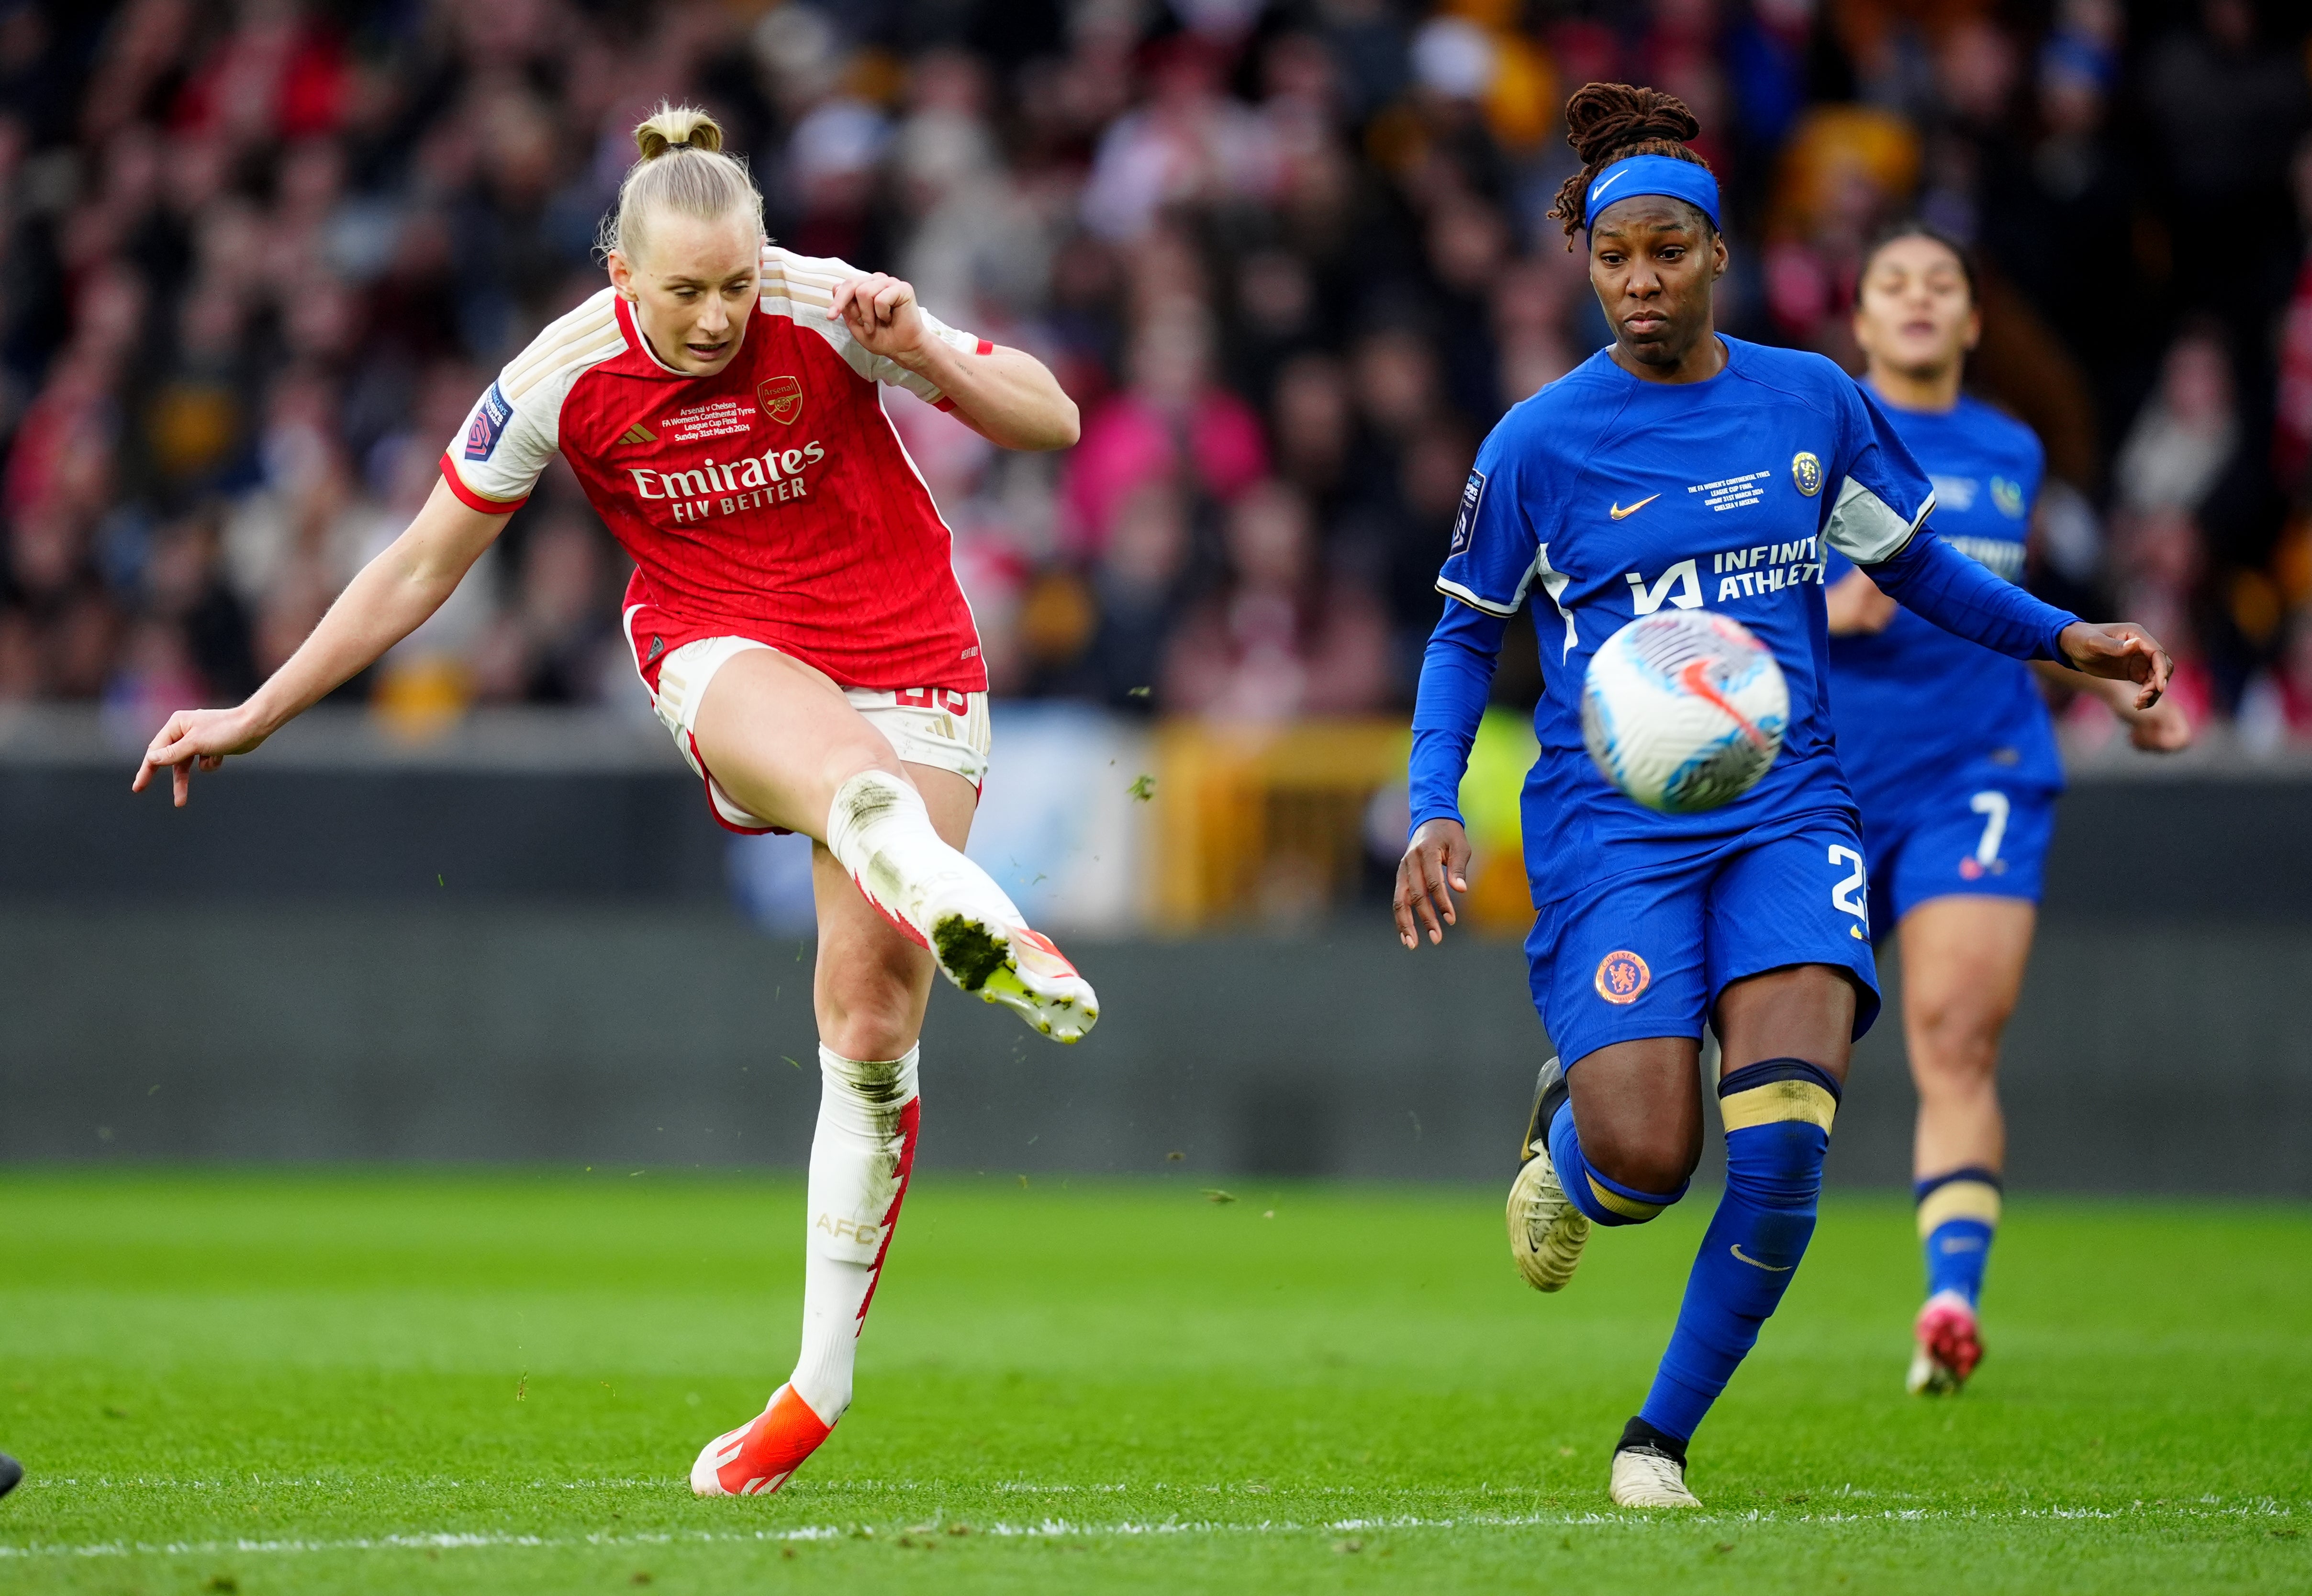 Stina Blackstenius’ extra-time goal ensured Arsenal triumphed in the Women’s League Cup